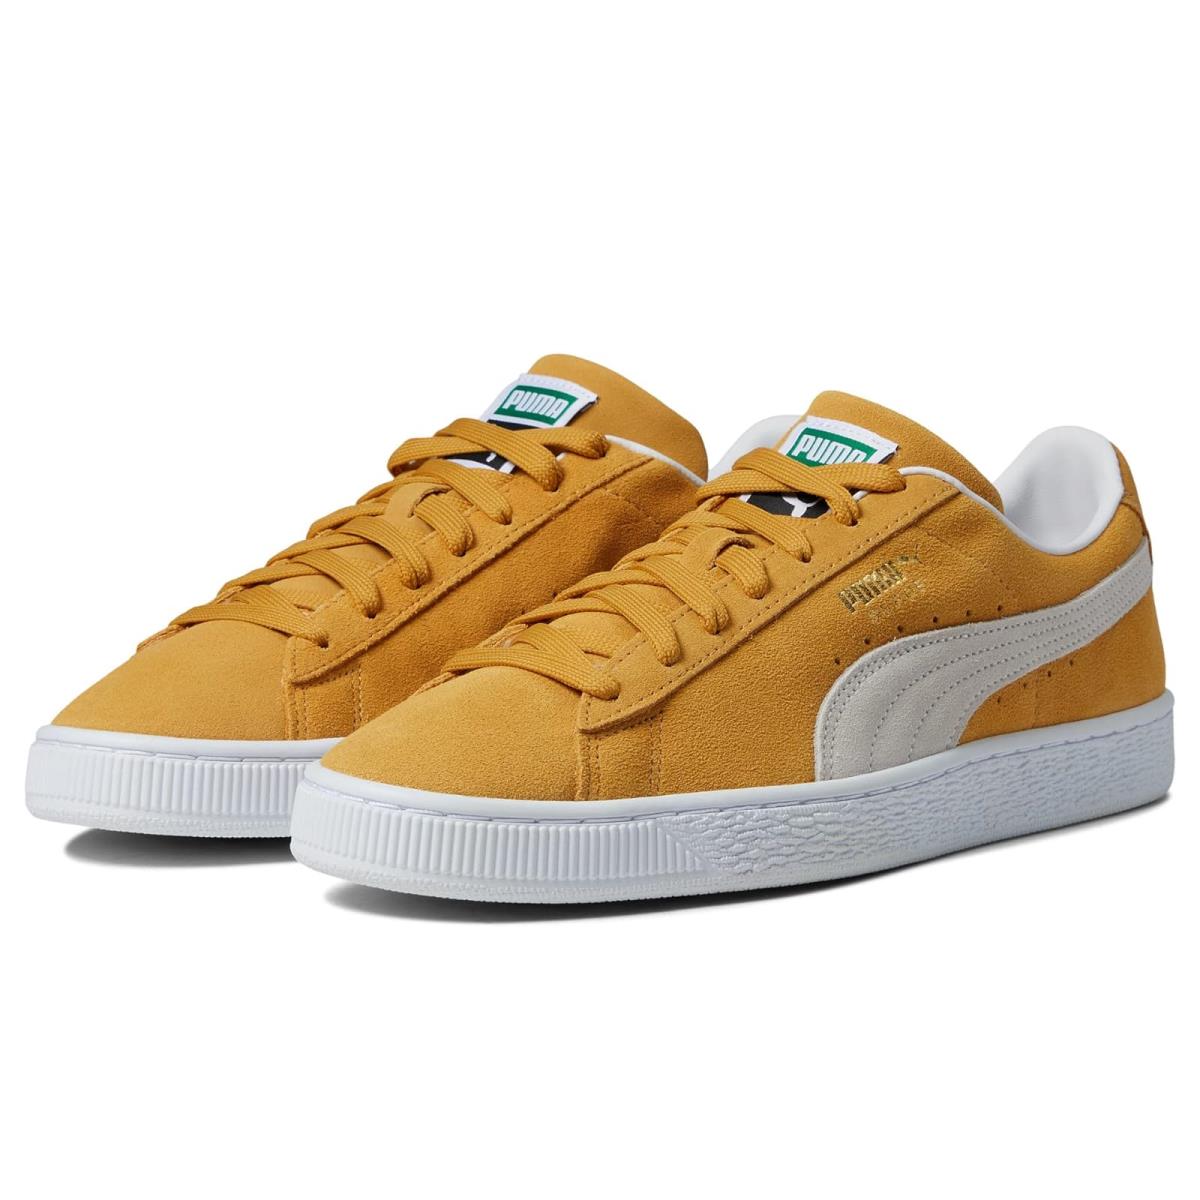 Man`s Sneakers Athletic Shoes Puma Suede Classic Xxi Honey Mustard/Puma White